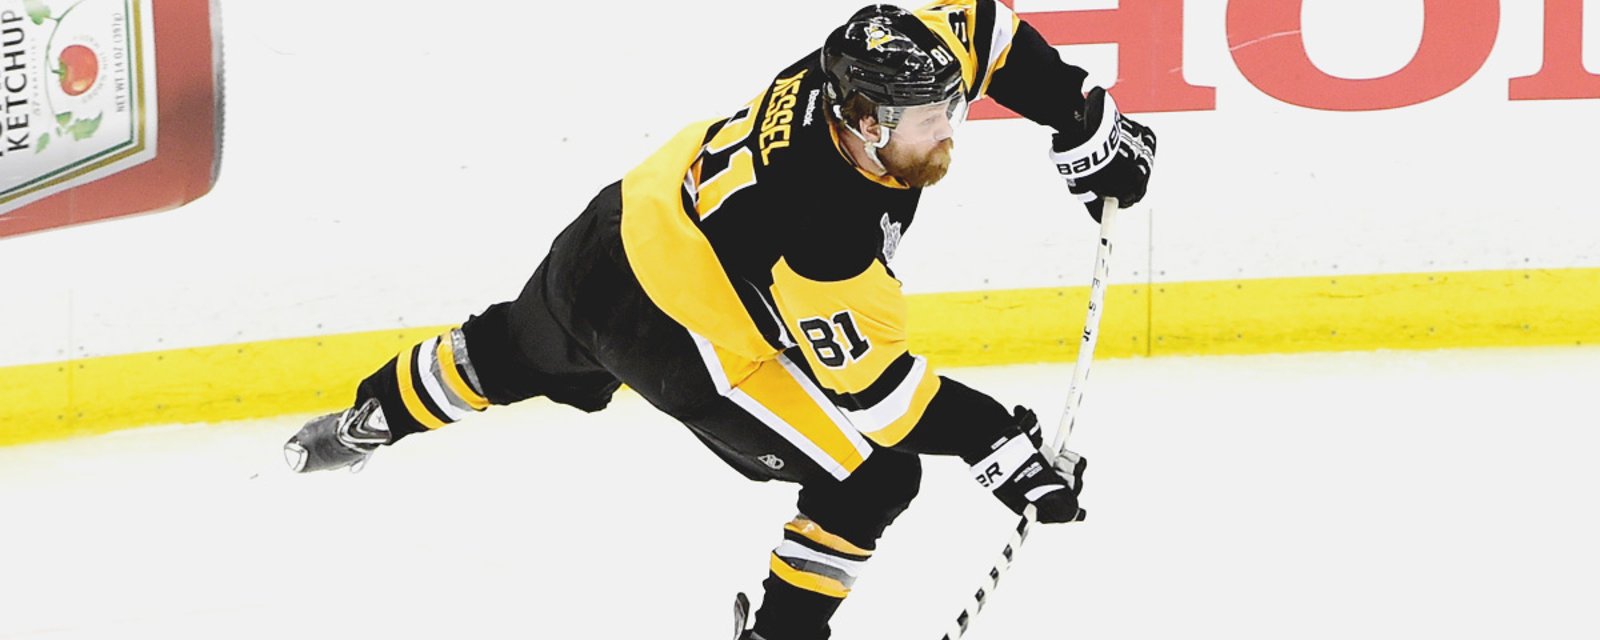 Must see : Phil Kessel's wrist shot was an absolute beauty!